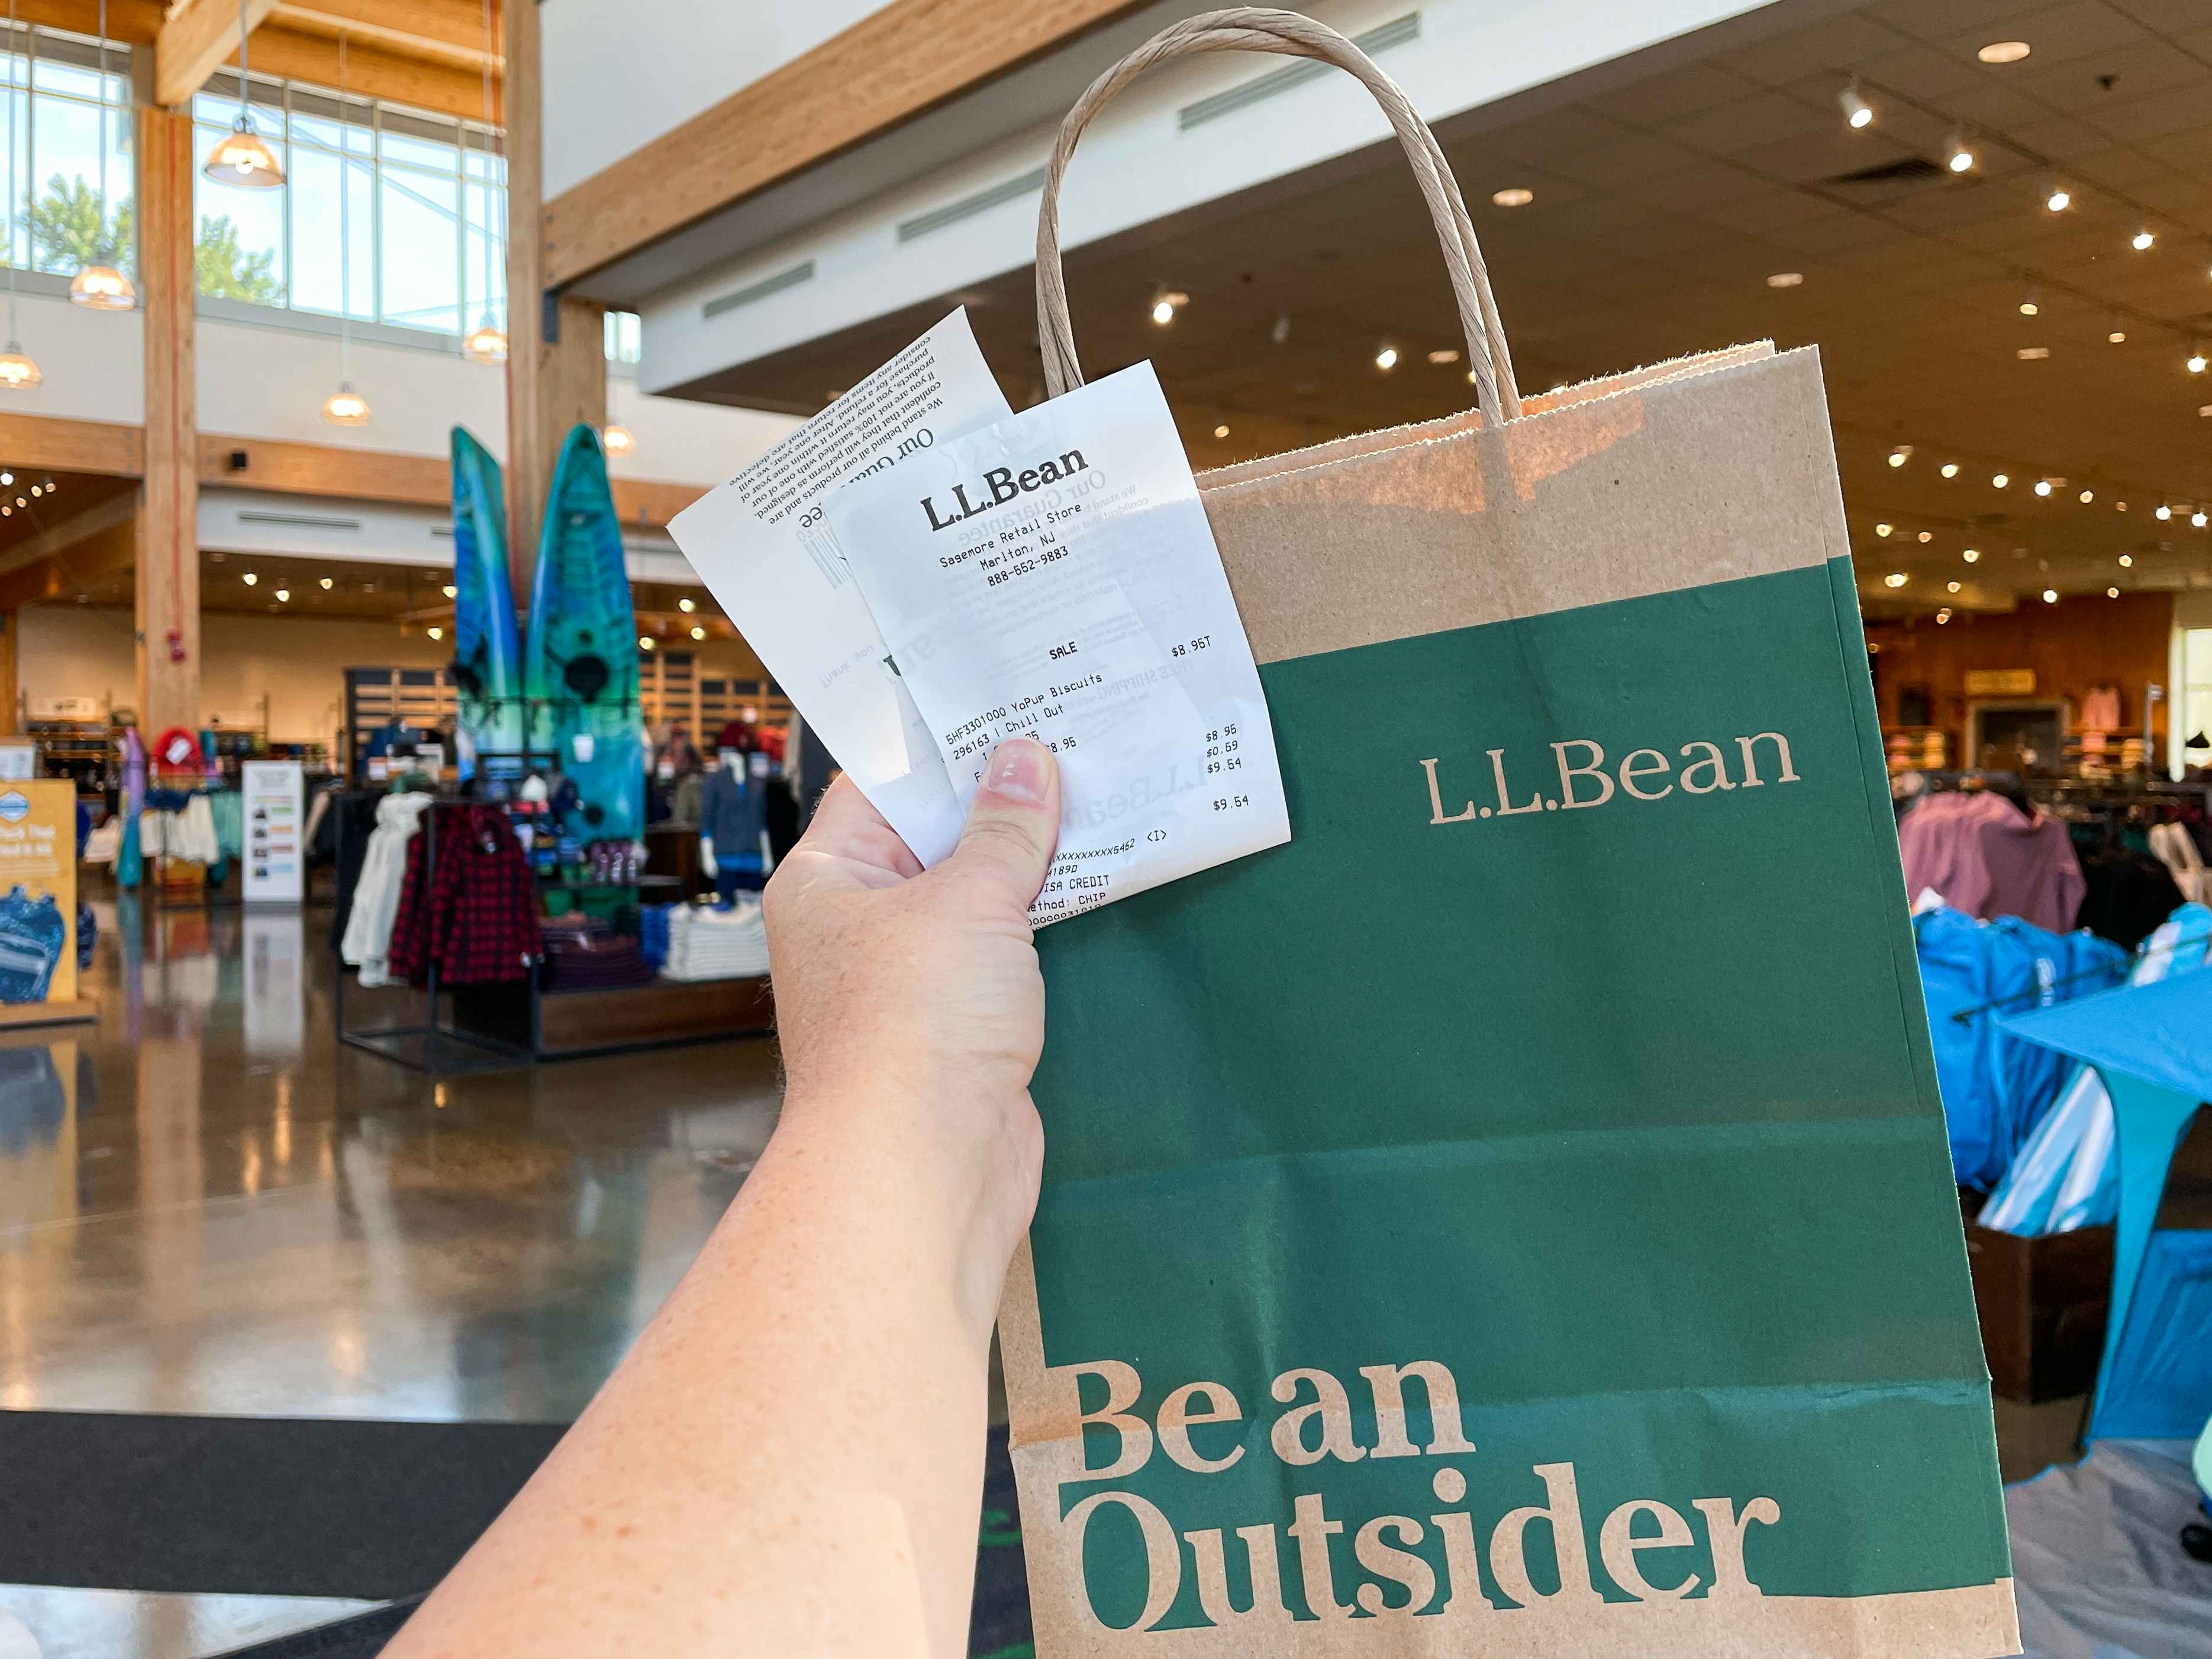 A person's hand holding up a L.L. Bean bag and receipt inside of an L.L.Bean store.